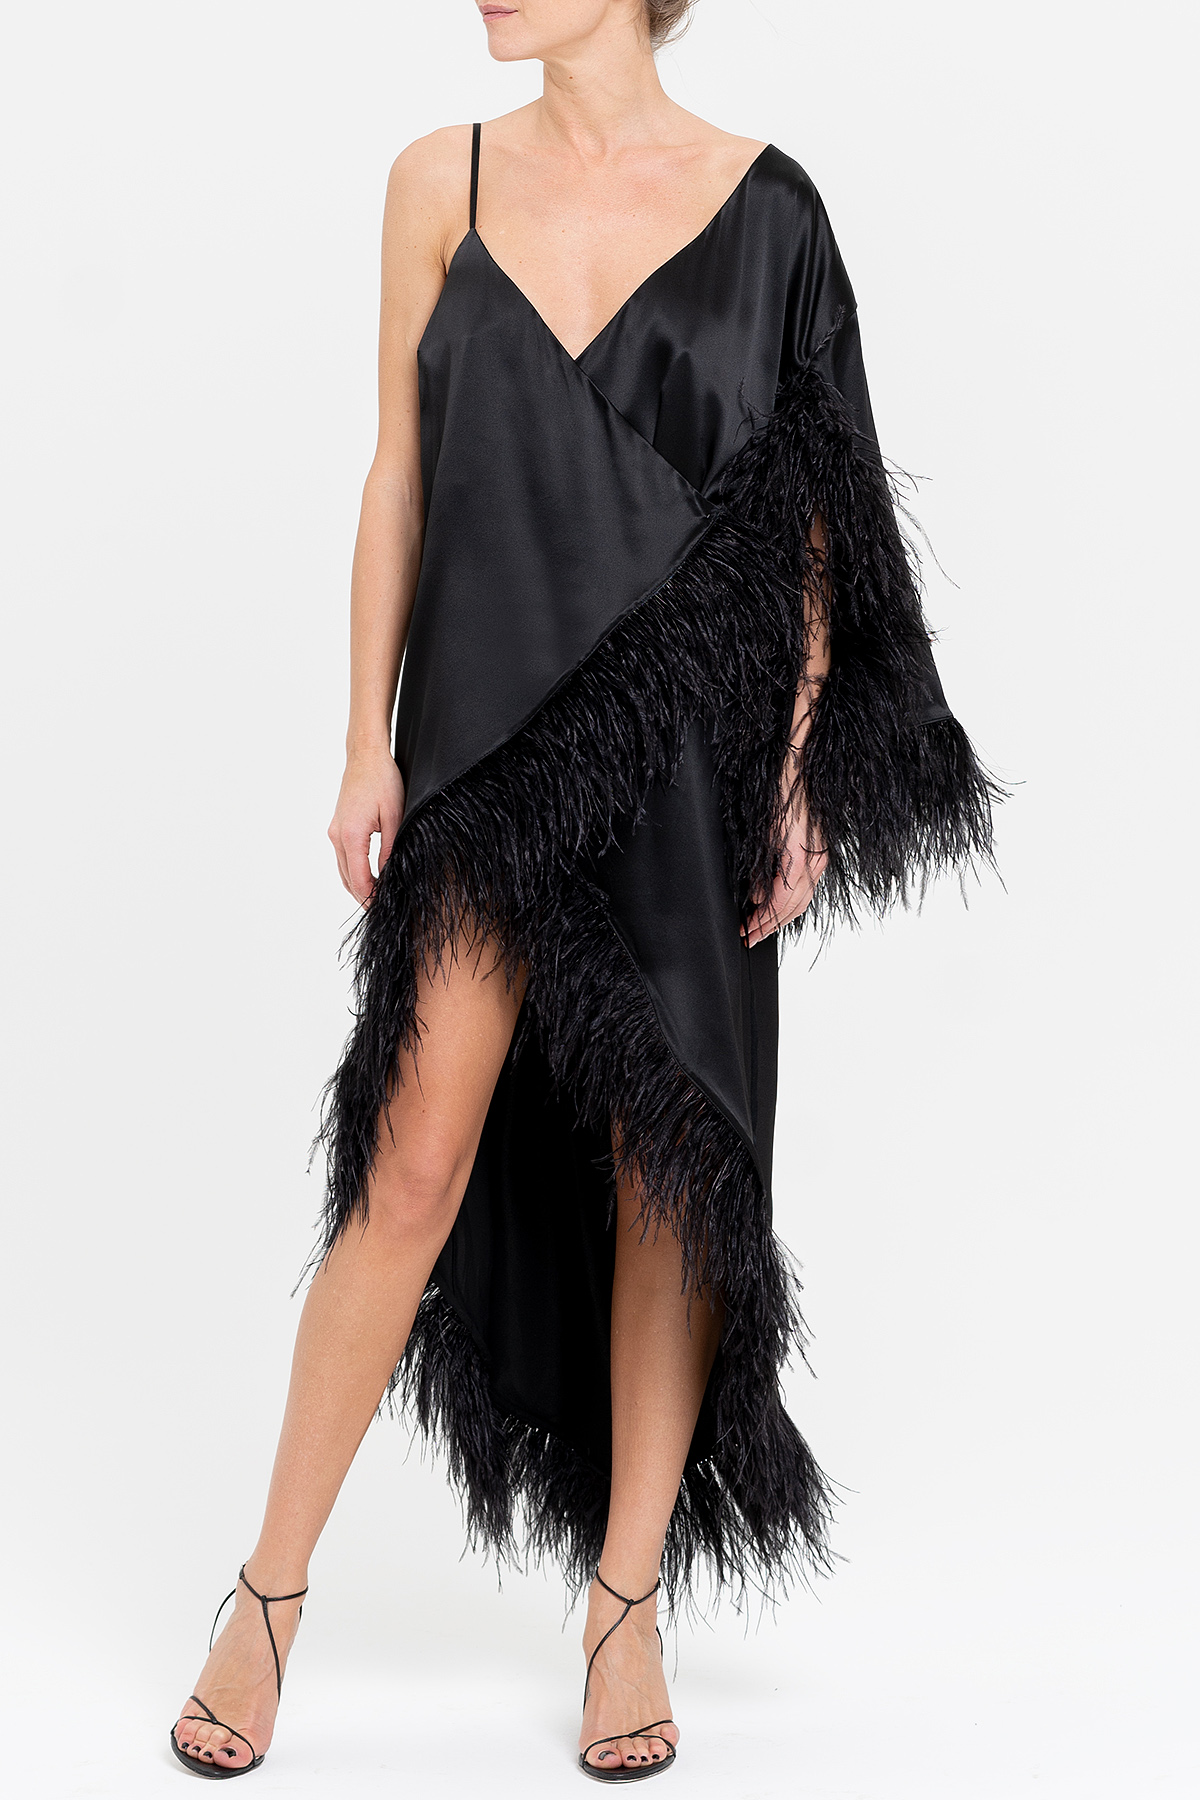  Dress with feathers